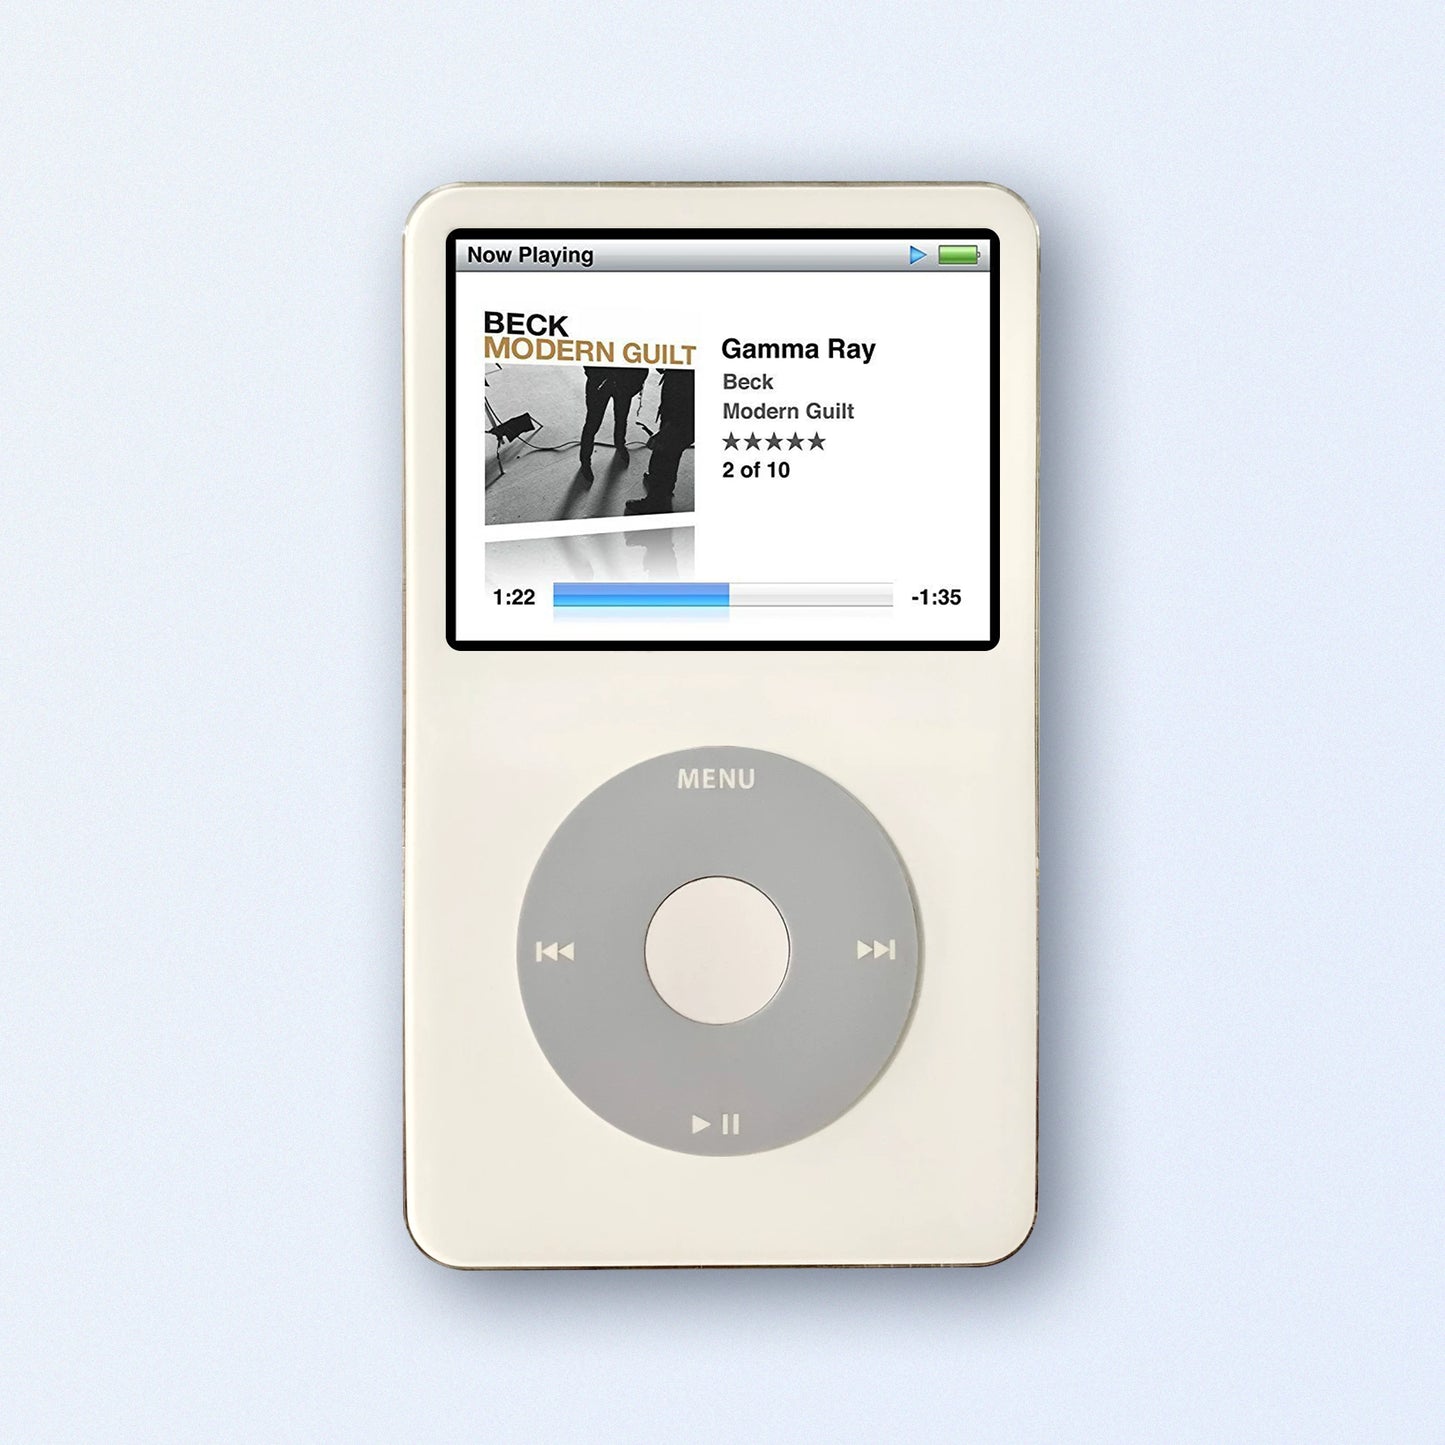 Bluetooth iPod Video 5th Generation White upgraded with SDXC Card